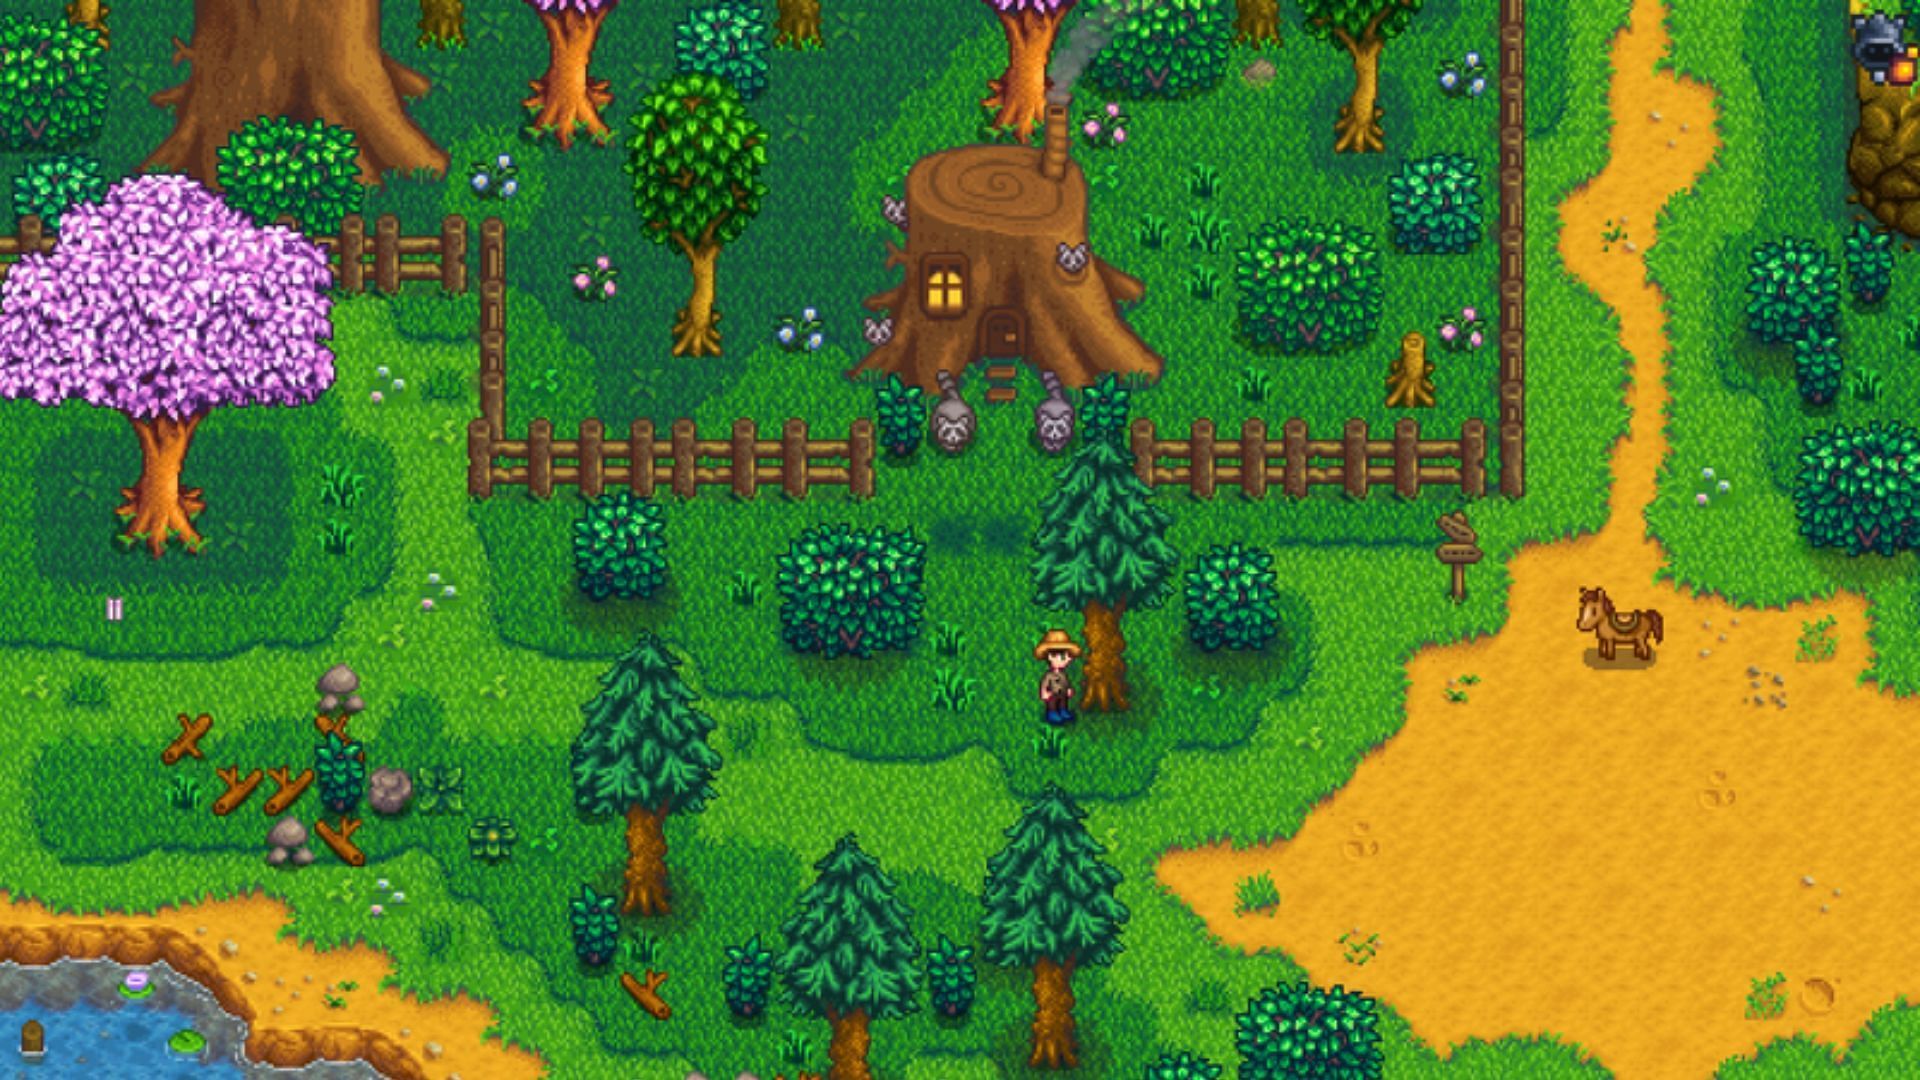 Giant Tree Stump after fixing it in Stardew Valley (Image via ConcernedApe)